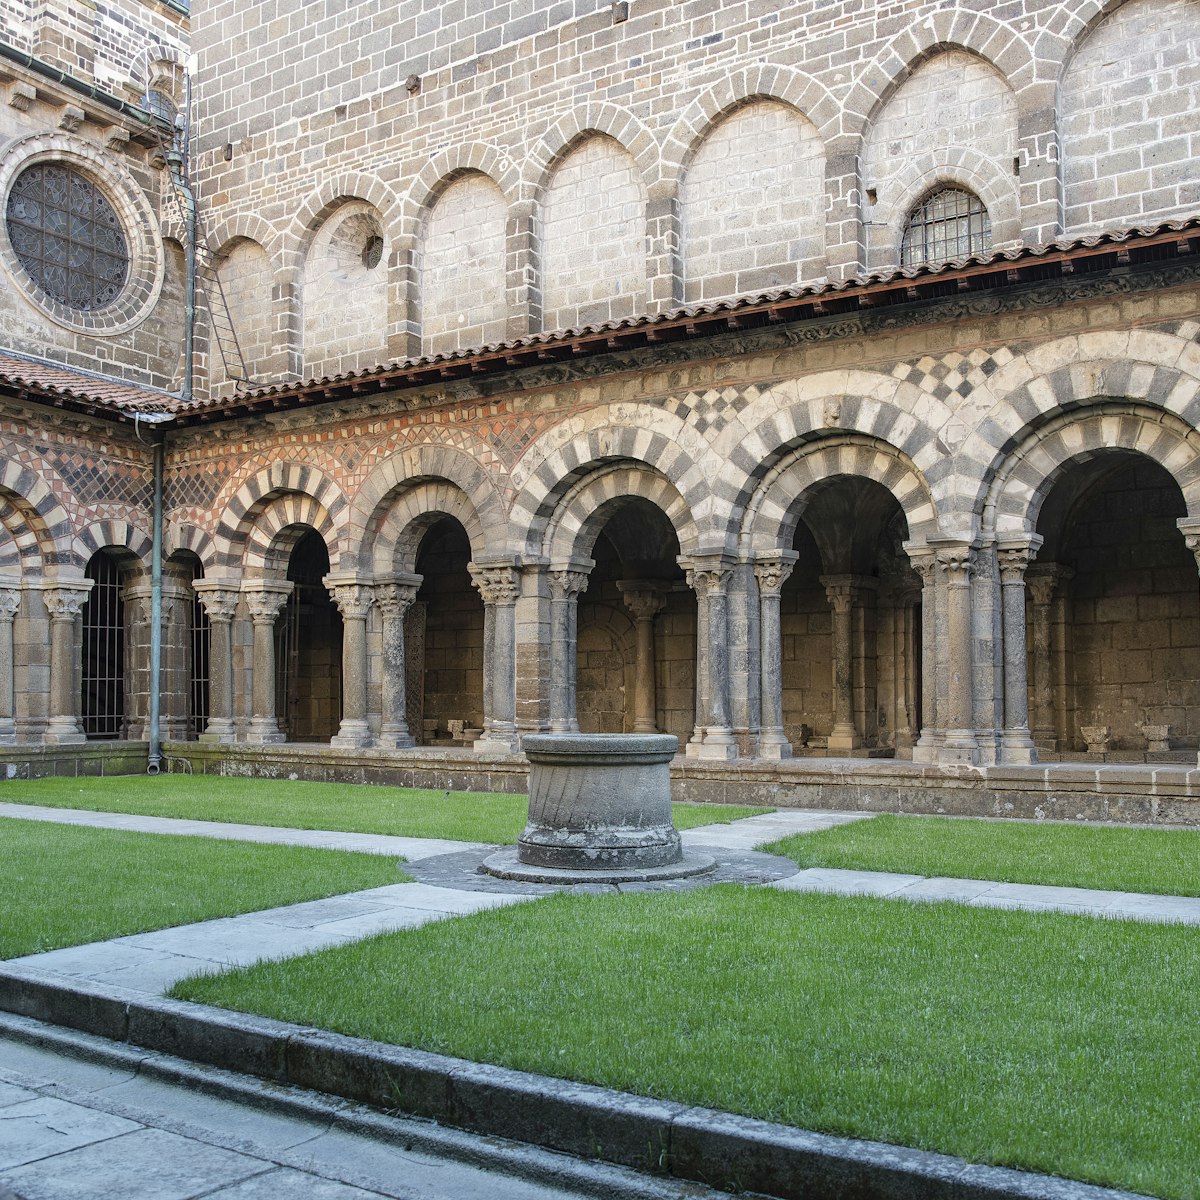 Cloister of Le Puy Cathedral.